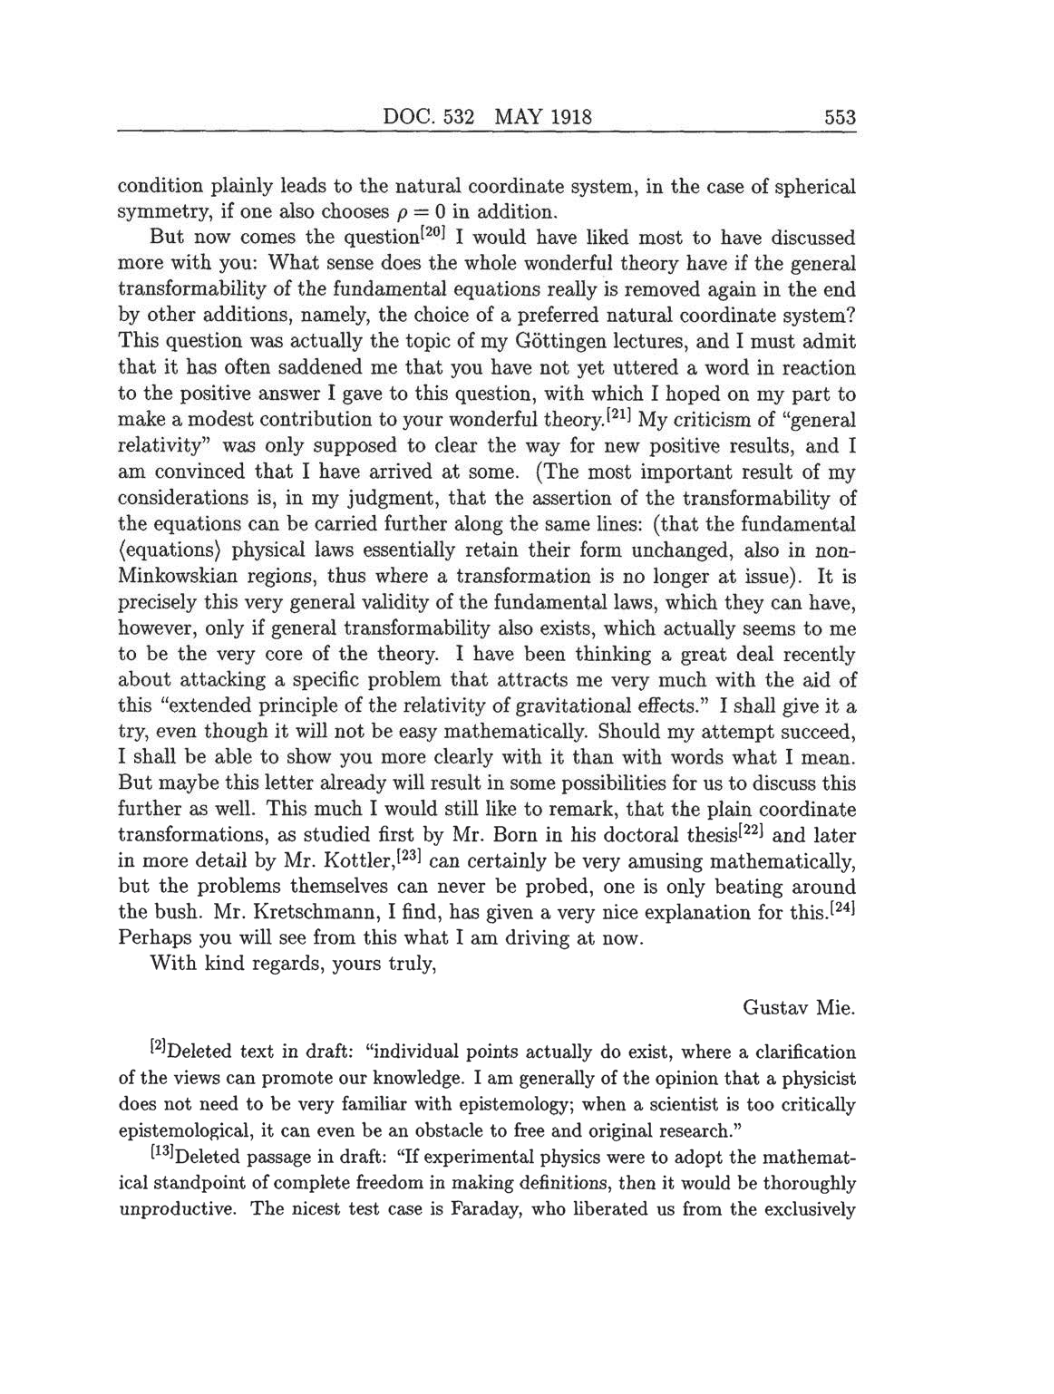 Volume 8: The Berlin Years: Correspondence, 1914-1918 (English translation supplement) page 553